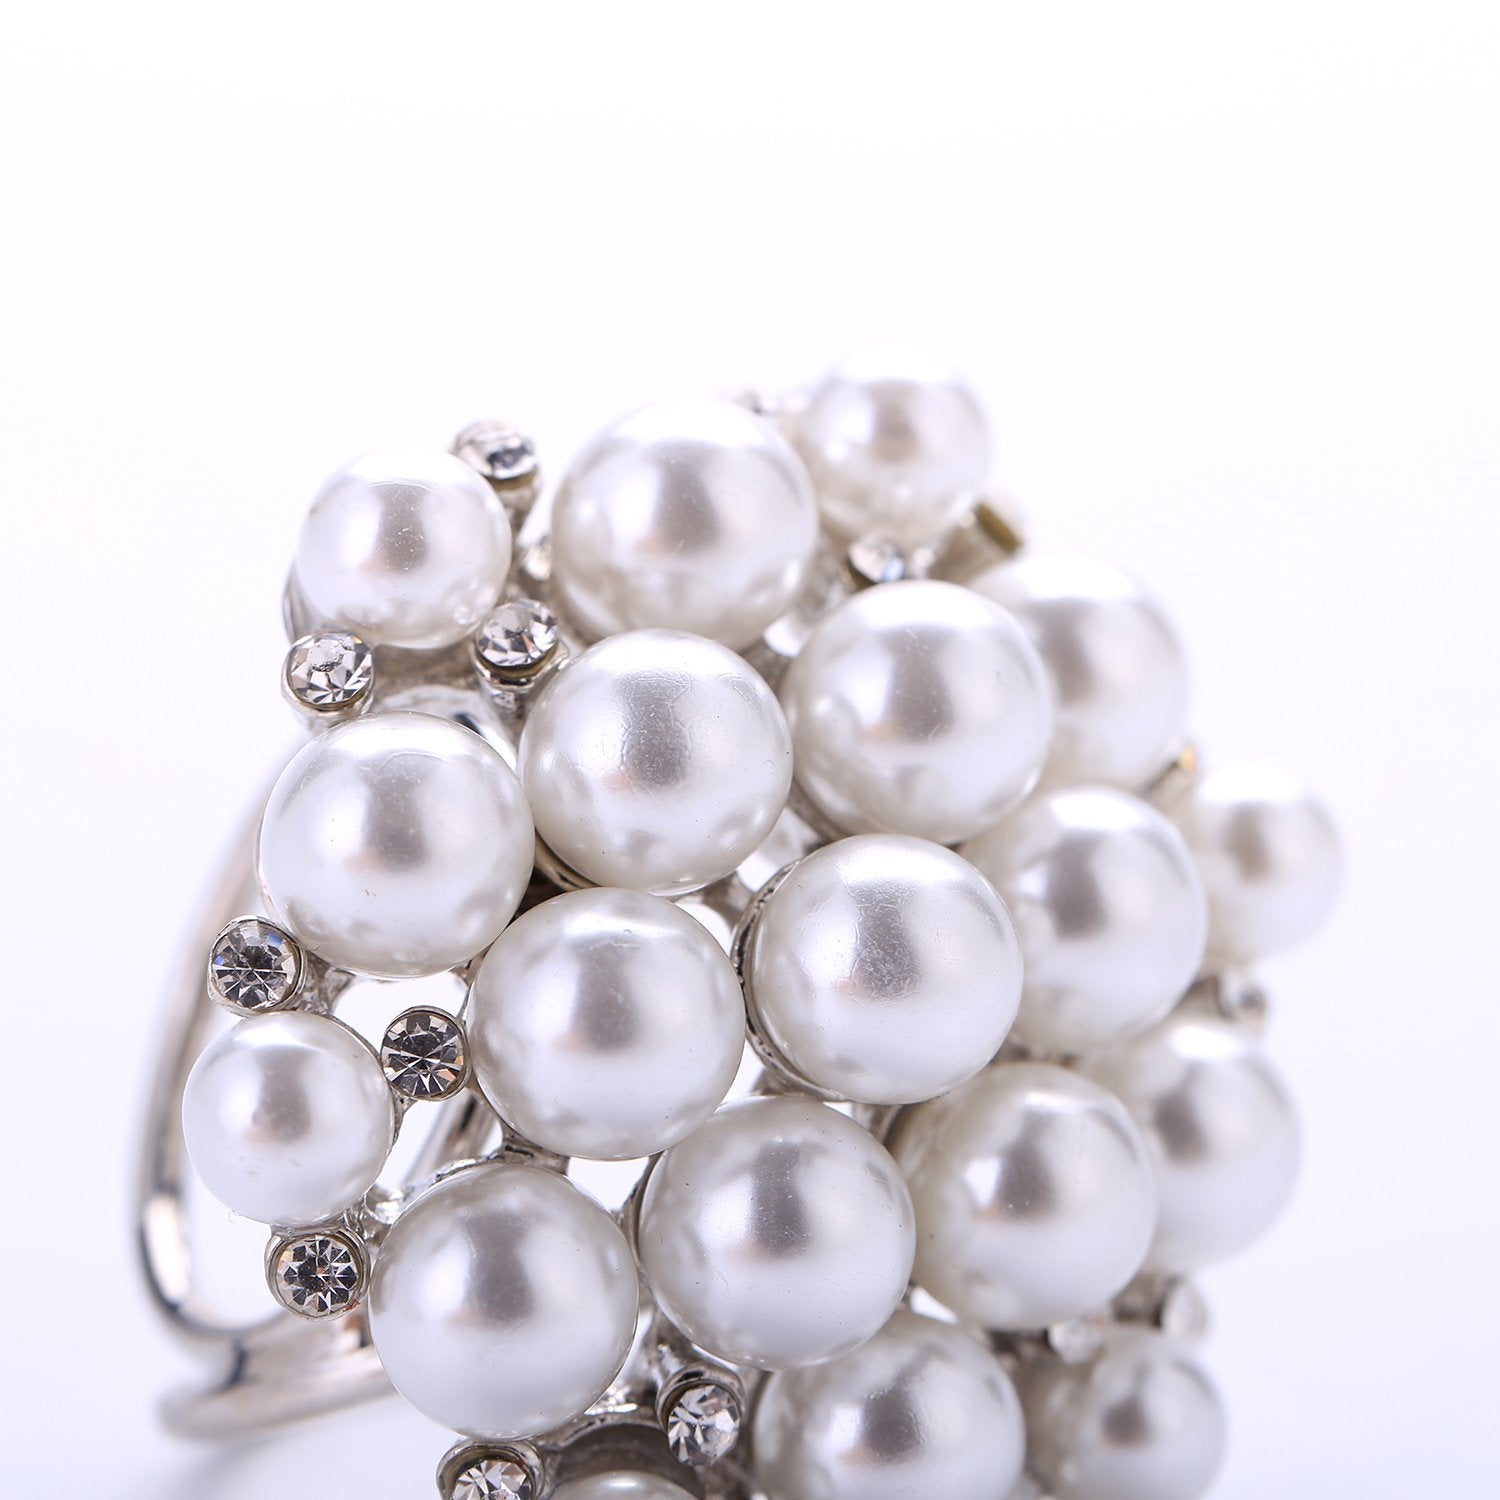 Silver Tone Scarf Ring Clip Holder With Central White Pearl 